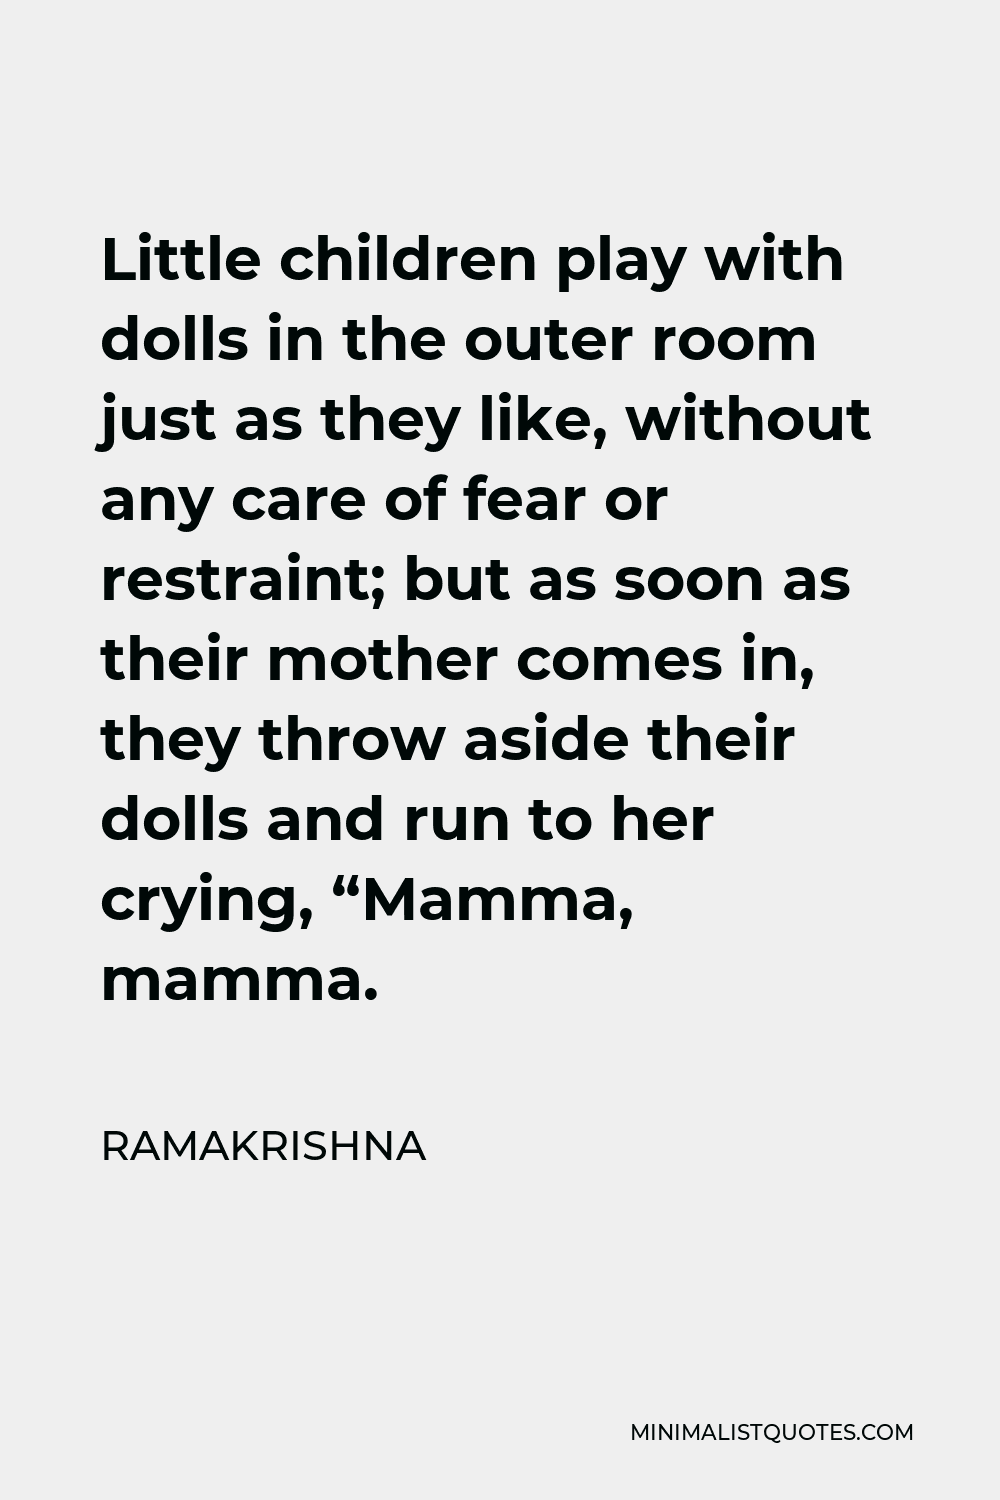 Ramakrishna Quote - Little children play with dolls in the outer room just as they like, without any care of fear or restraint; but as soon as their mother comes in, they throw aside their dolls and run to her crying, “Mamma, mamma.